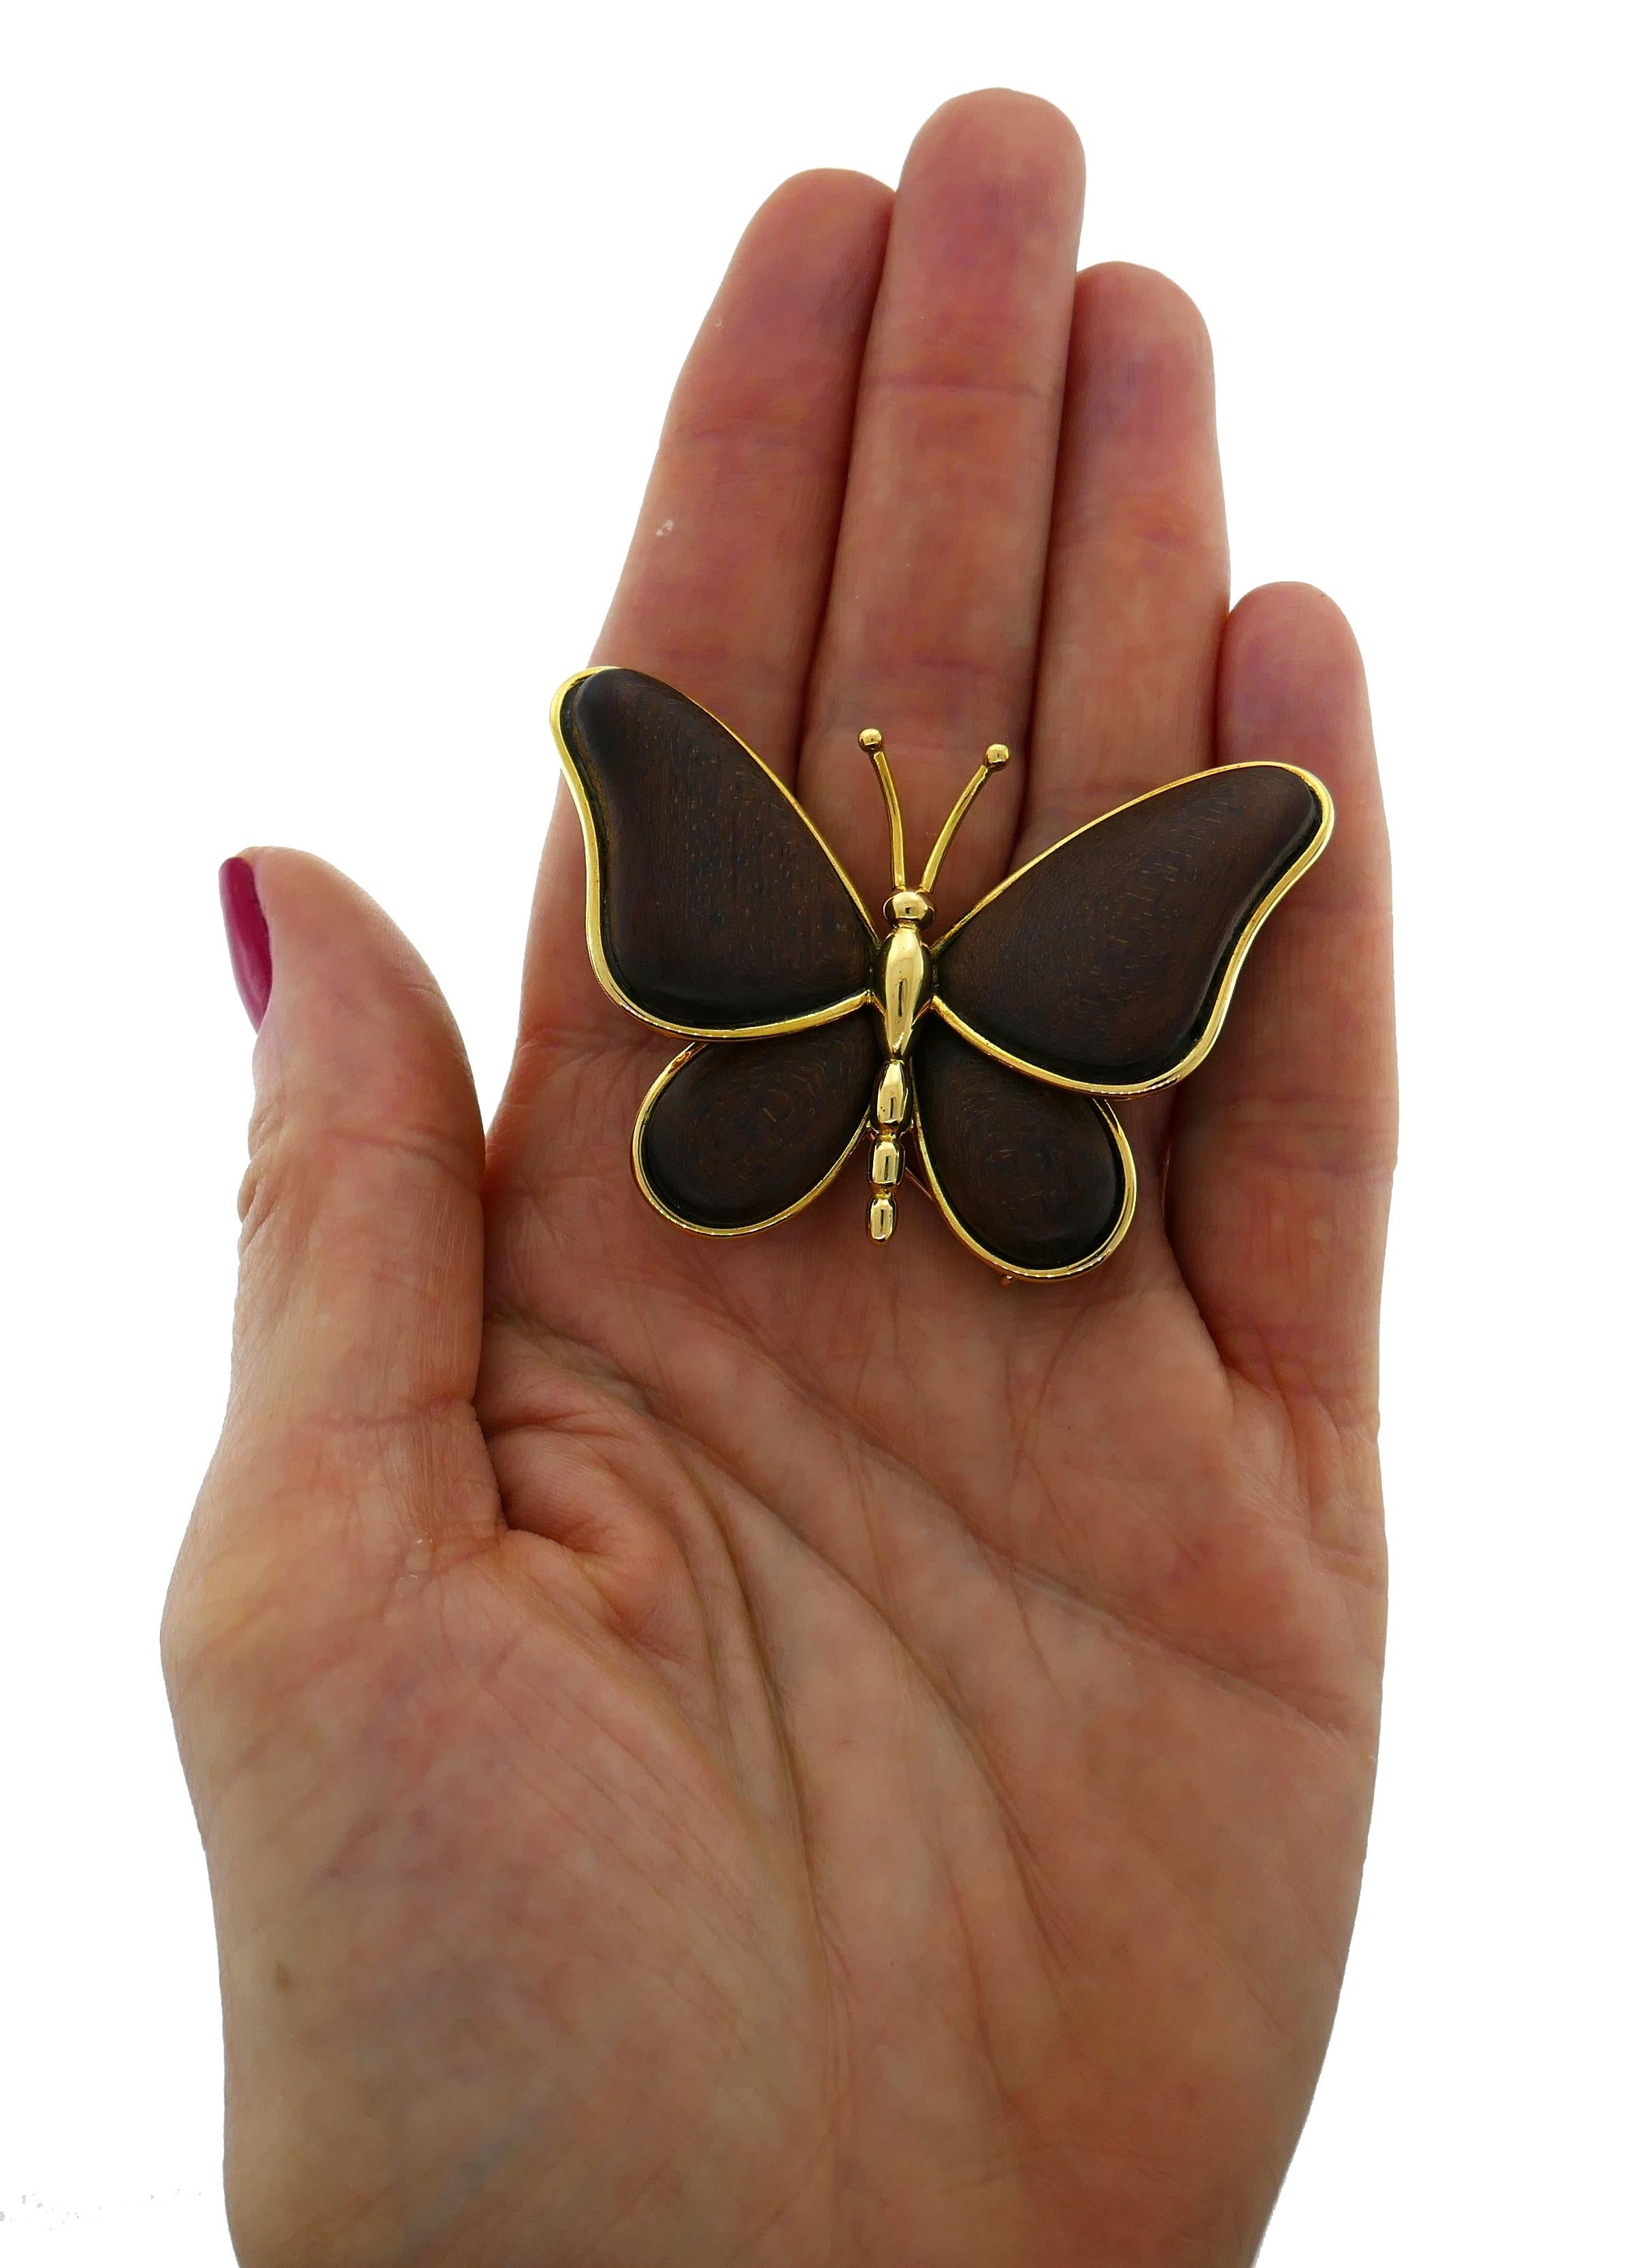 Signature Van Cleef & Arpels butterfly clip created in the 1960s. This older version of the brooch is rare. Gracious, feminine and wearable, the brooch is a great addition to your jewelry collection. Beautiful lines and perfect proportions are the